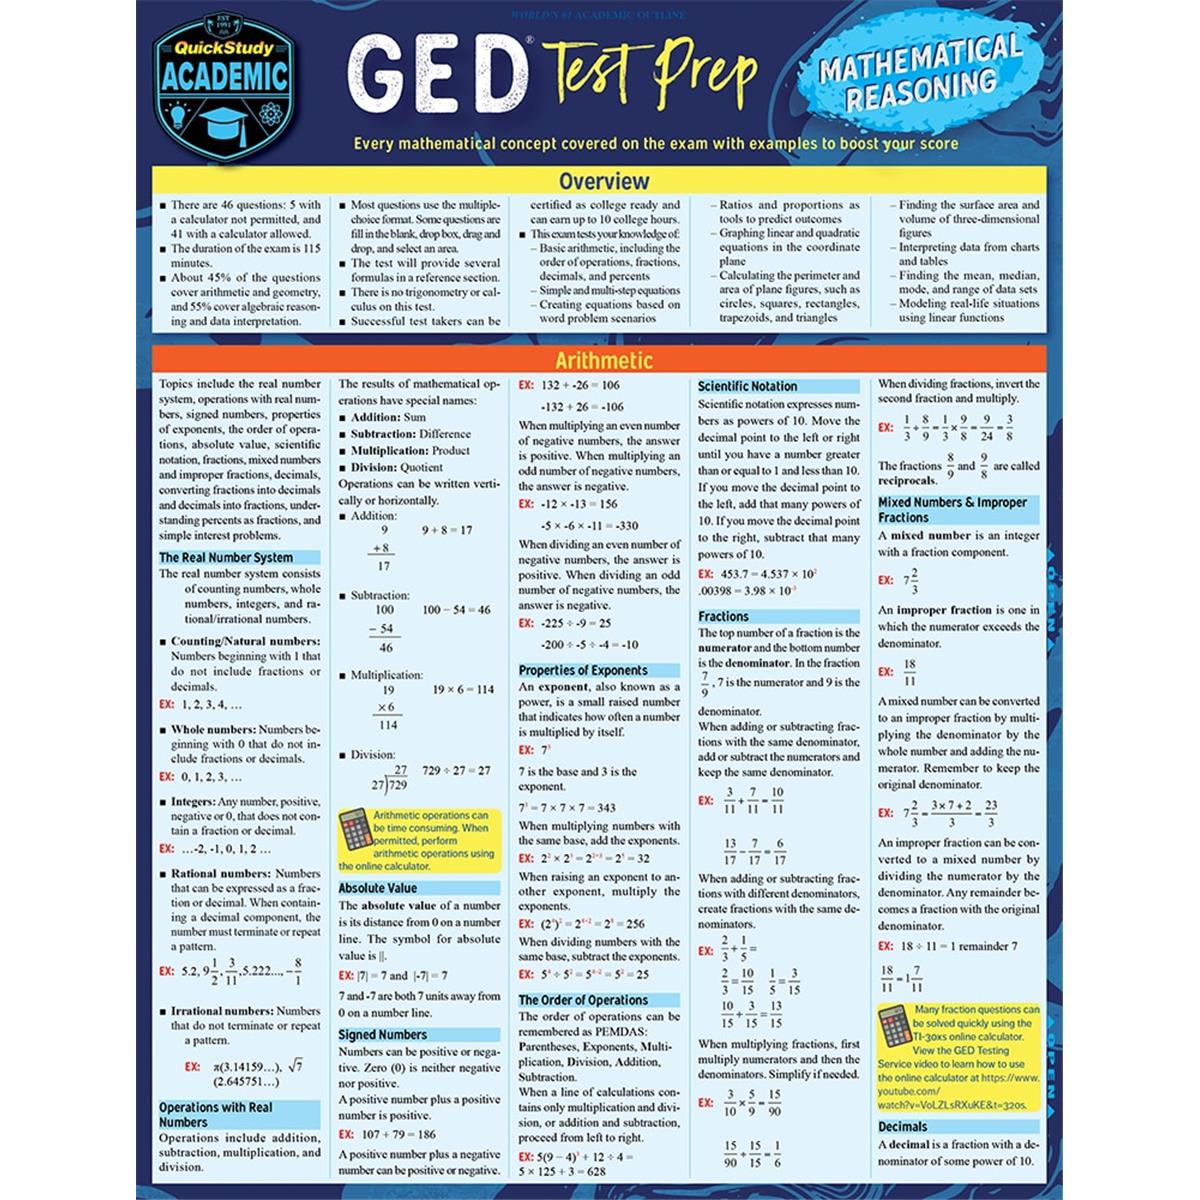 9781423239826 GED Test Prep - Mathematical Reasoning Laminated Study Guide -  BarCharts